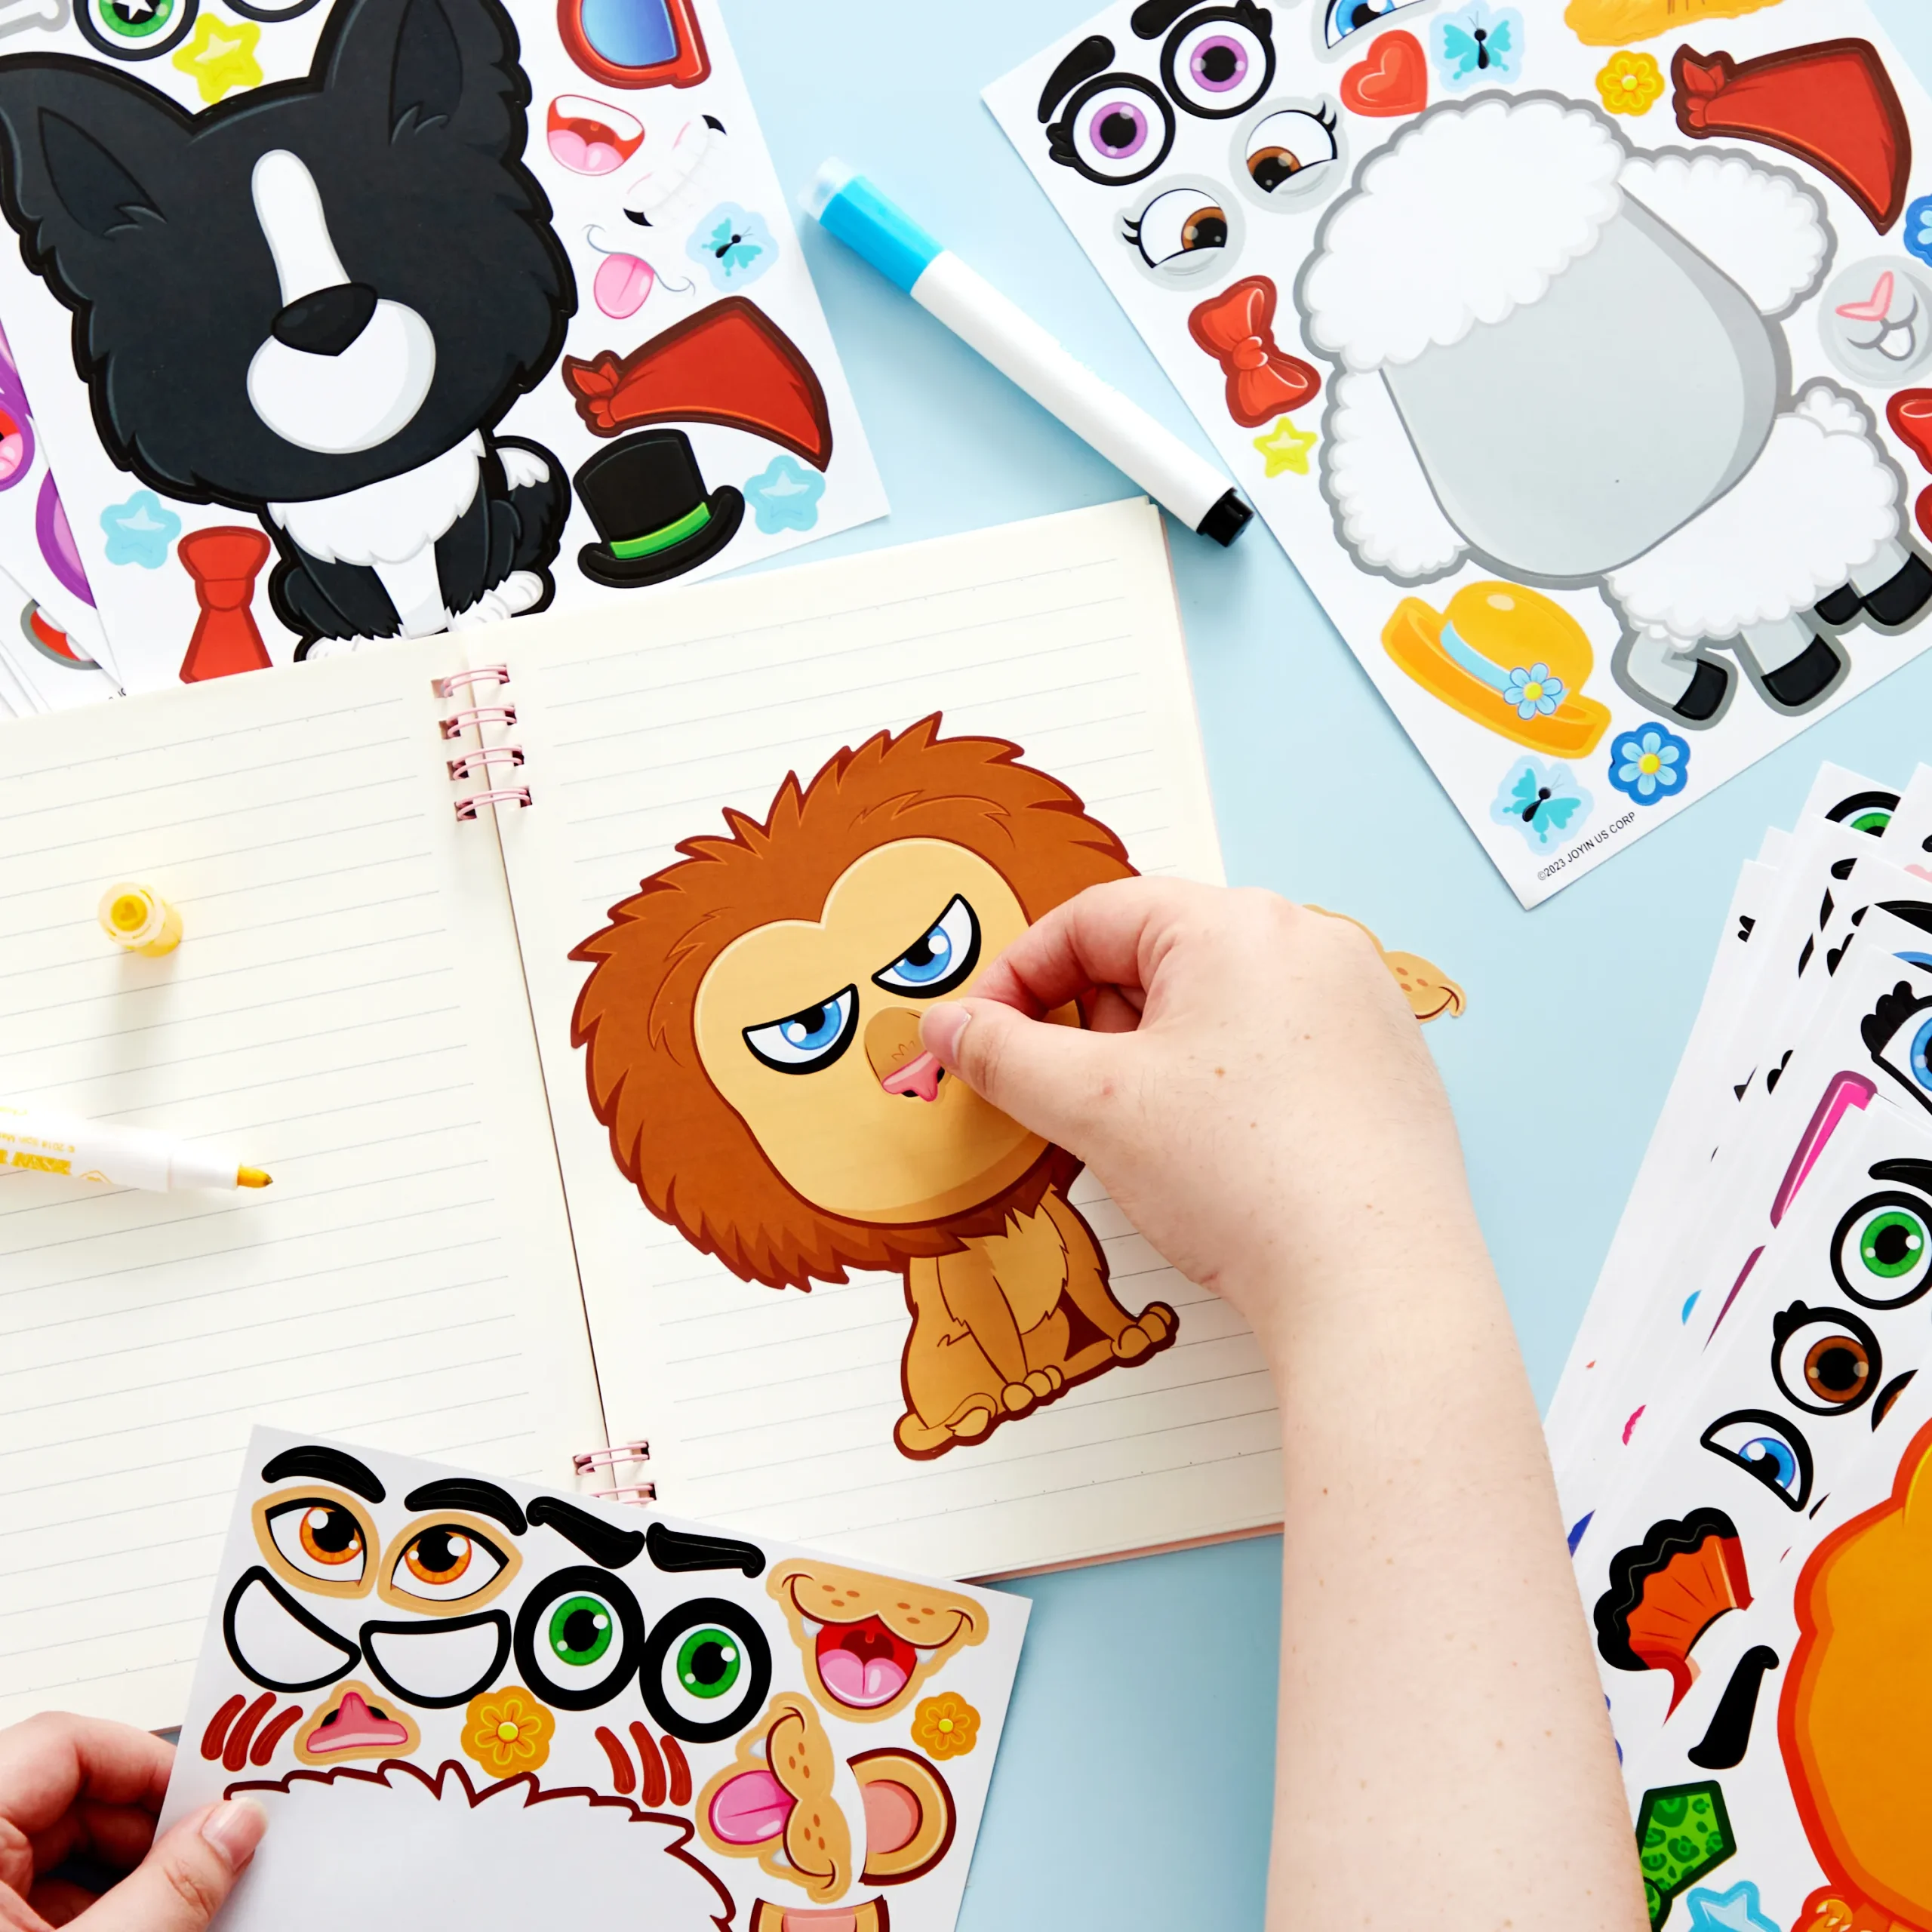 JOYIN 36 Pcs Make-a-Face Sticker Sheets Make Your Own Animal Mix and Match Sticker Sheets with Safaris Sea and Fantasy Animals Kids Party Favor